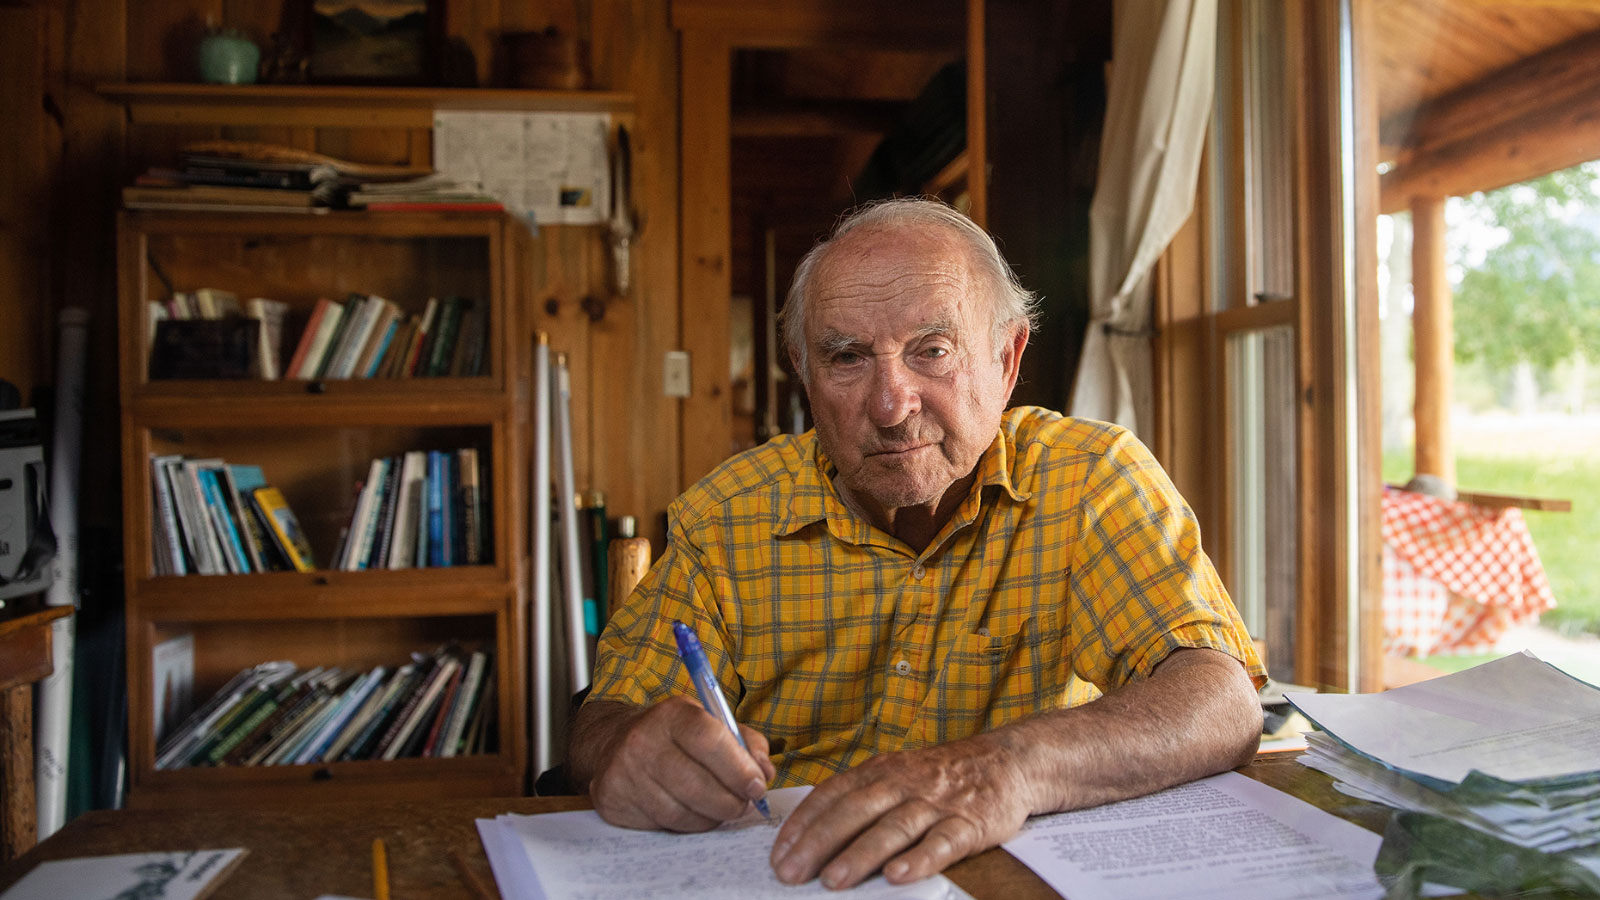 Portrait of Yvon Chouinard, the founder of Patagonia, sitting at a desk writing on a piece of paper and looking into the camera